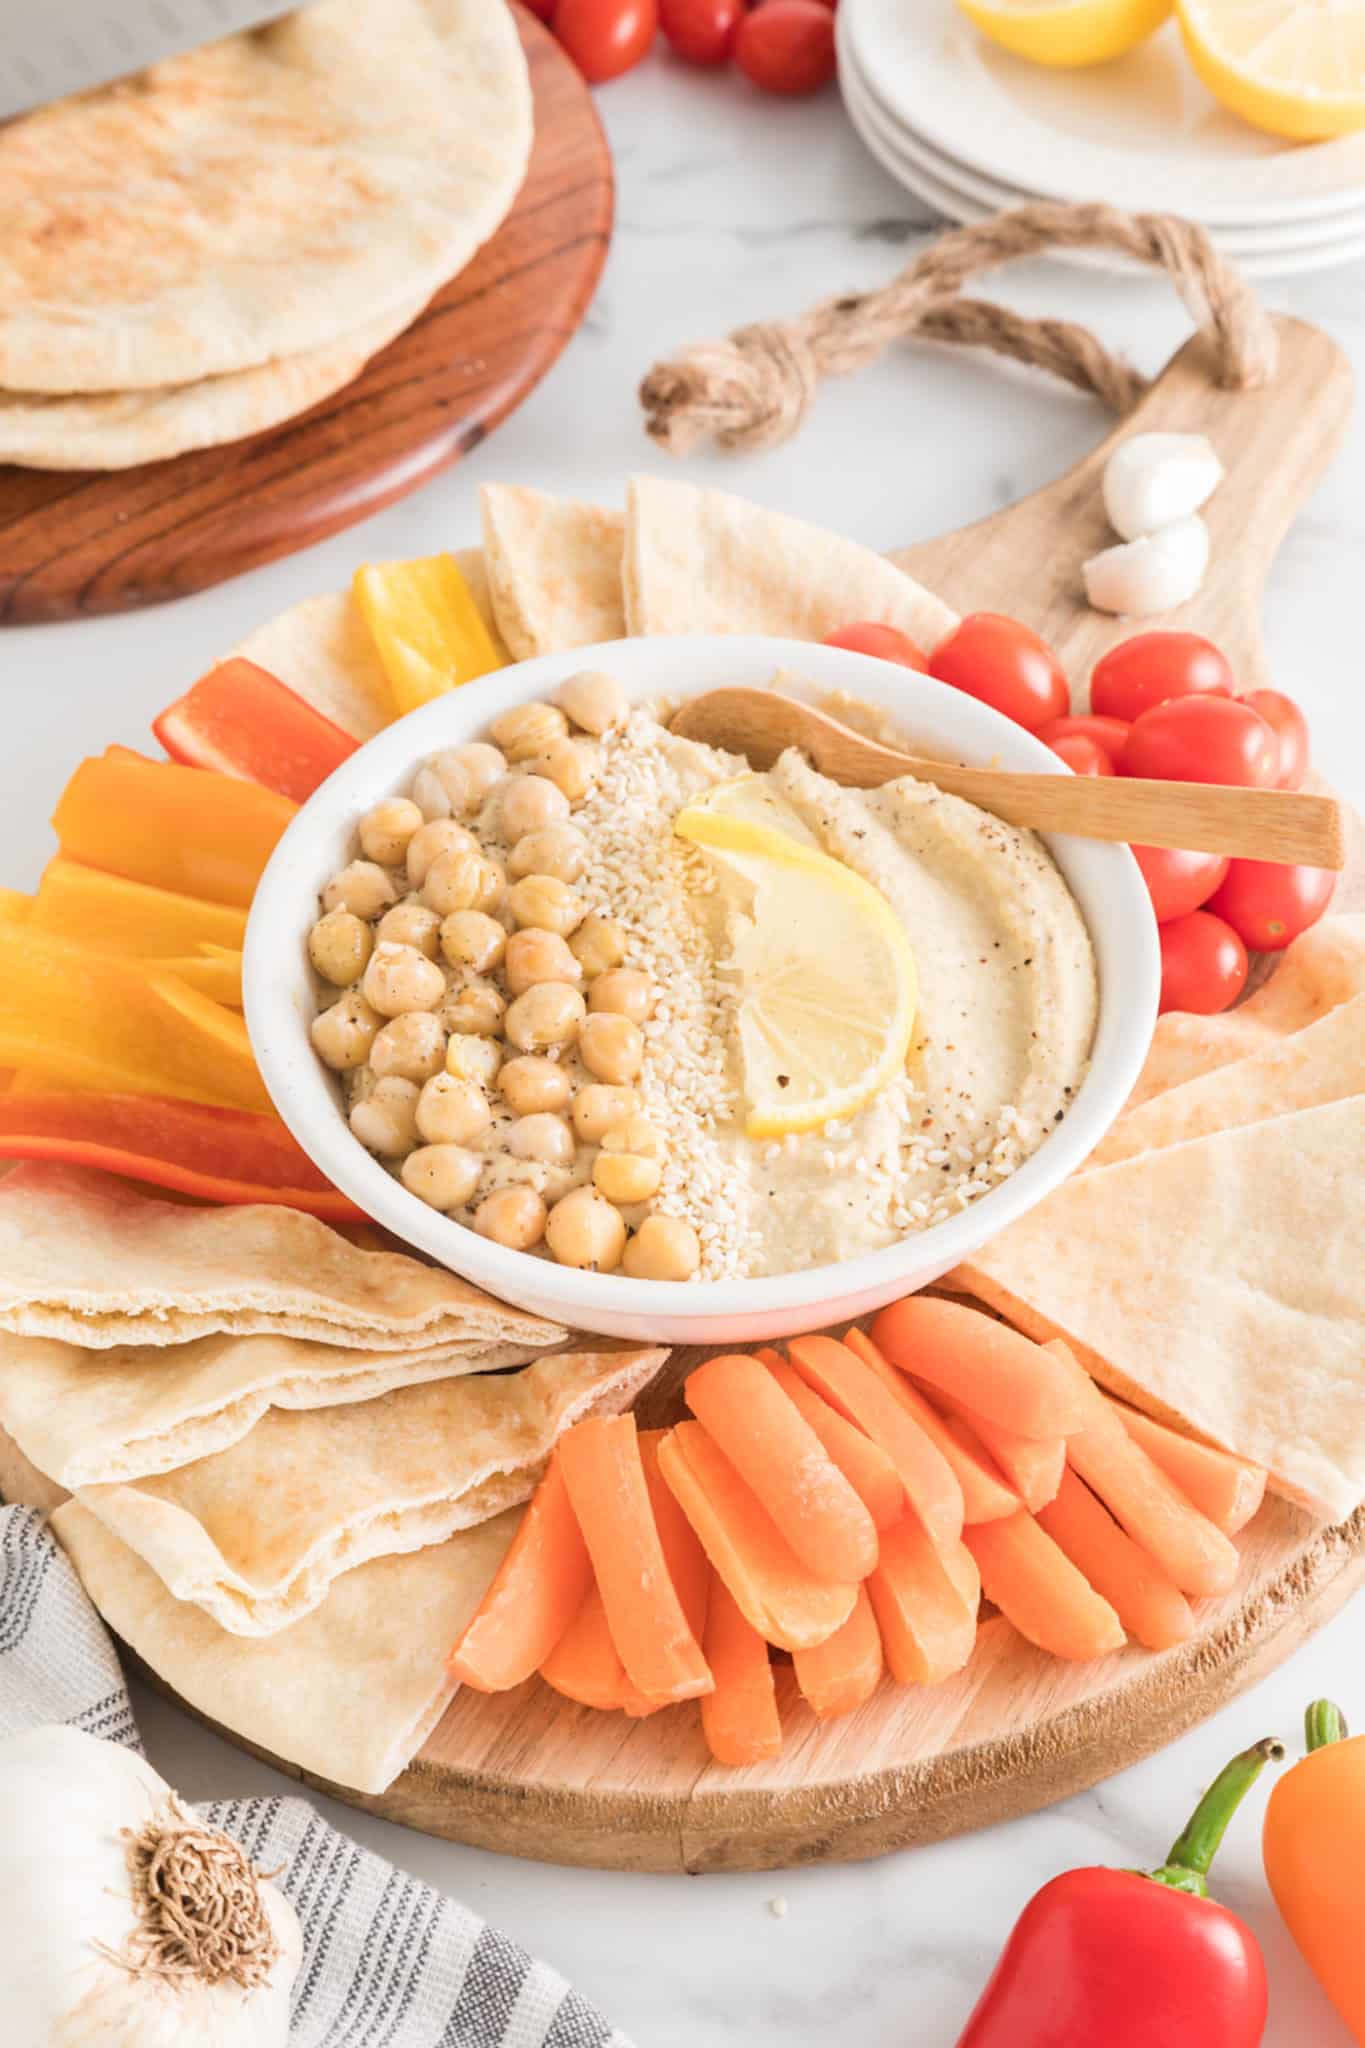 A wooden platter with sliced veggies and quartered pita around a small bowl of hummus.